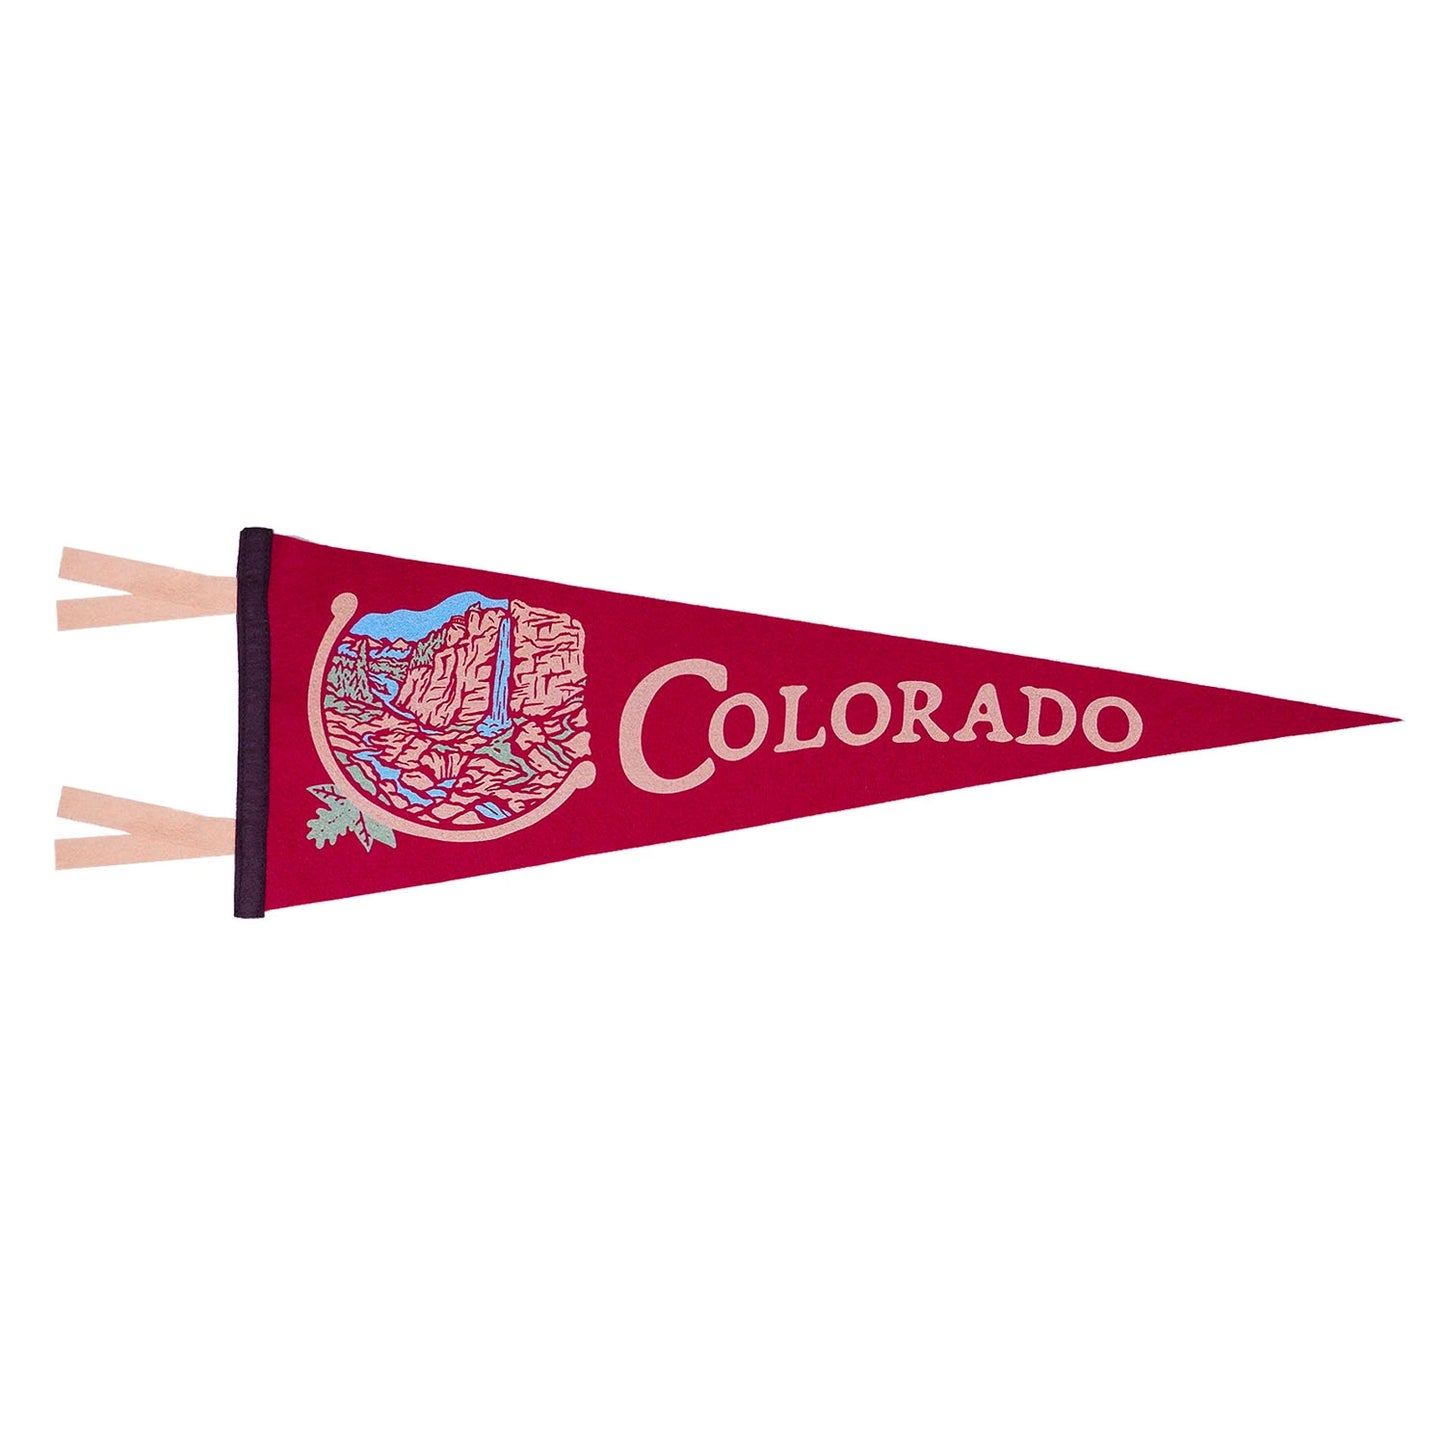 Colorado. State Pennant